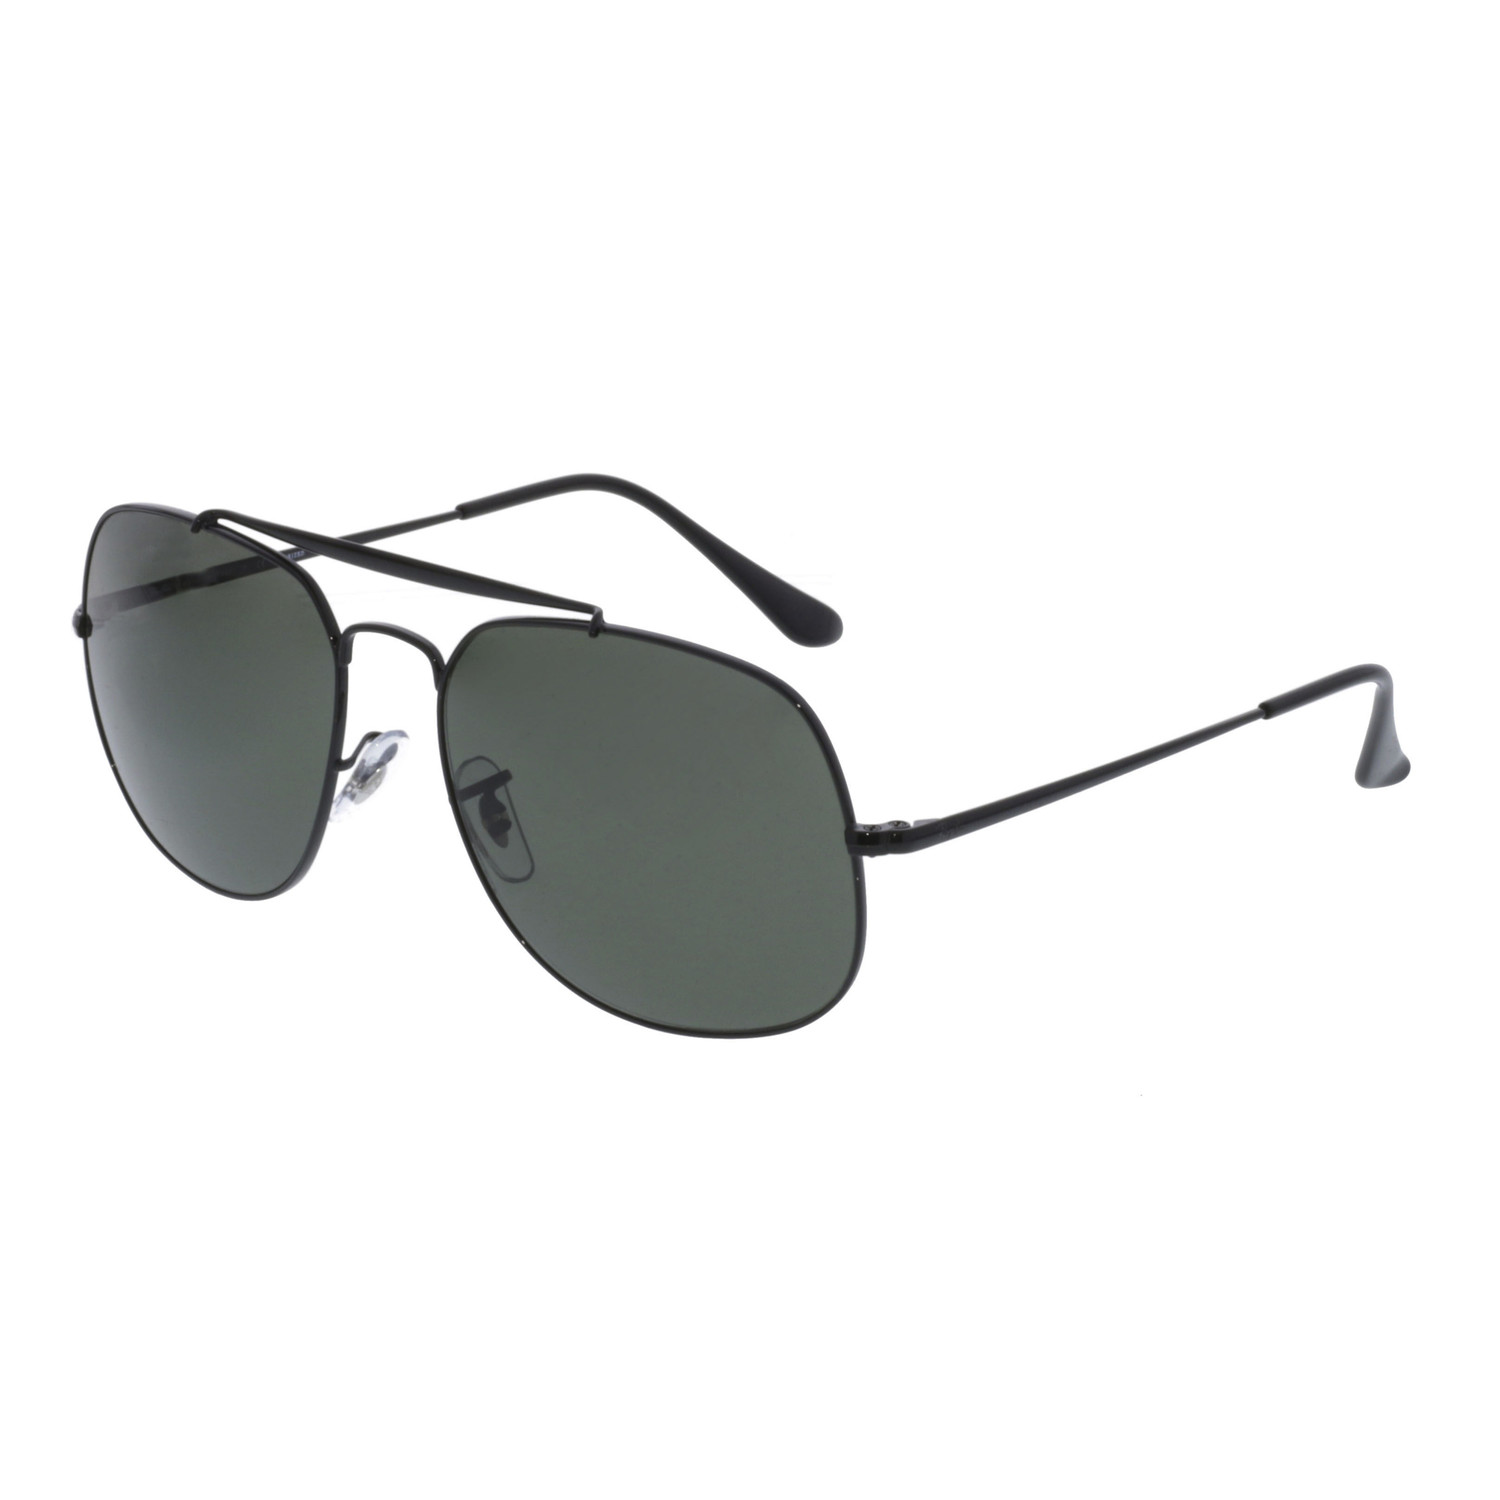 General Metal Aviator Sunglasses Black Gray Polarized Ray Ban® Touch Of Modern